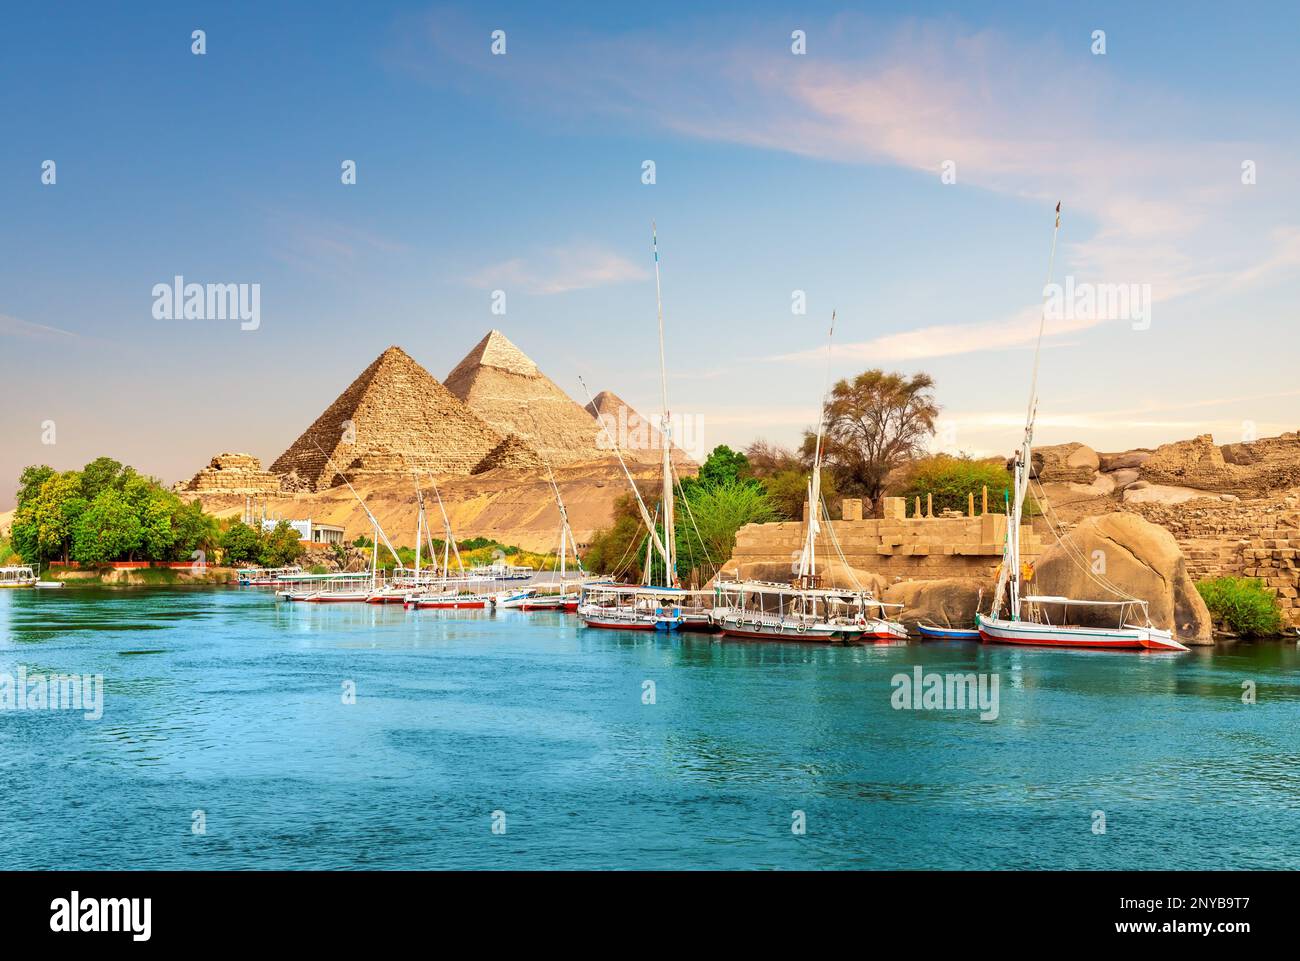 Ancient rocks and sailboats on the bank of the Nile, Aswan, Egypt. Stock Photo